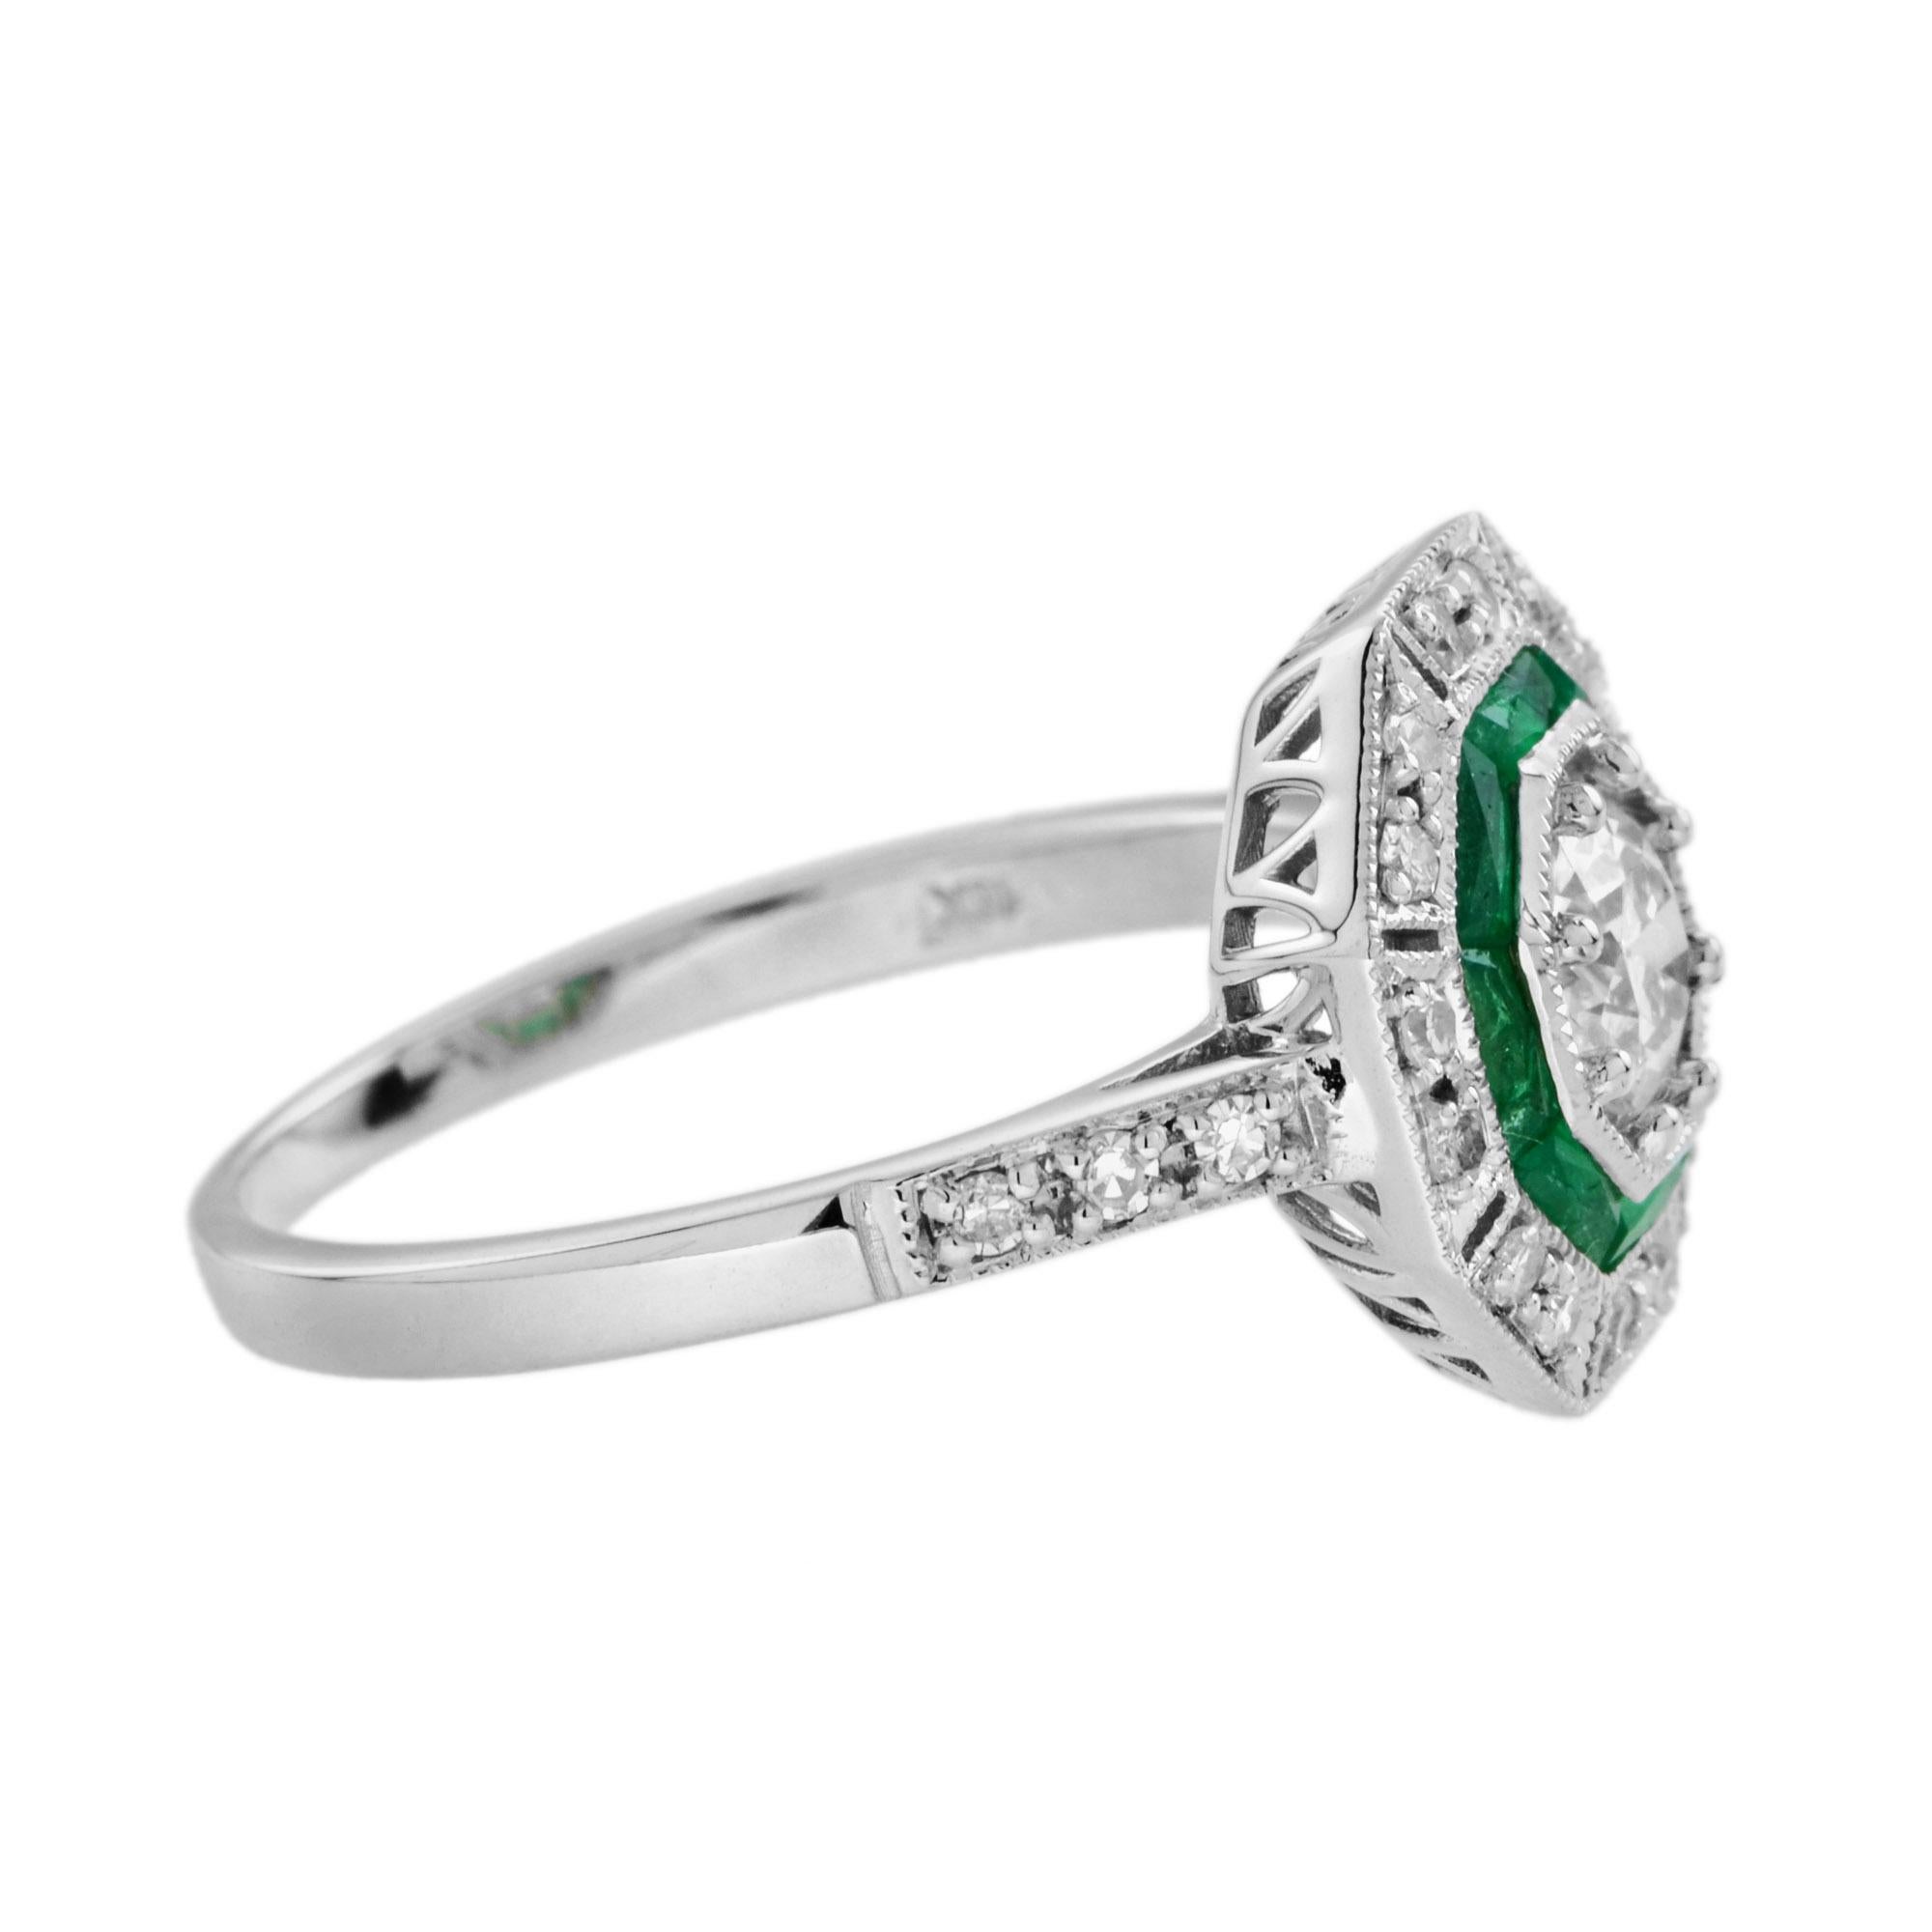 Art Deco Diamond and Emerald Octagonal Shape Ring in 18k White Gold